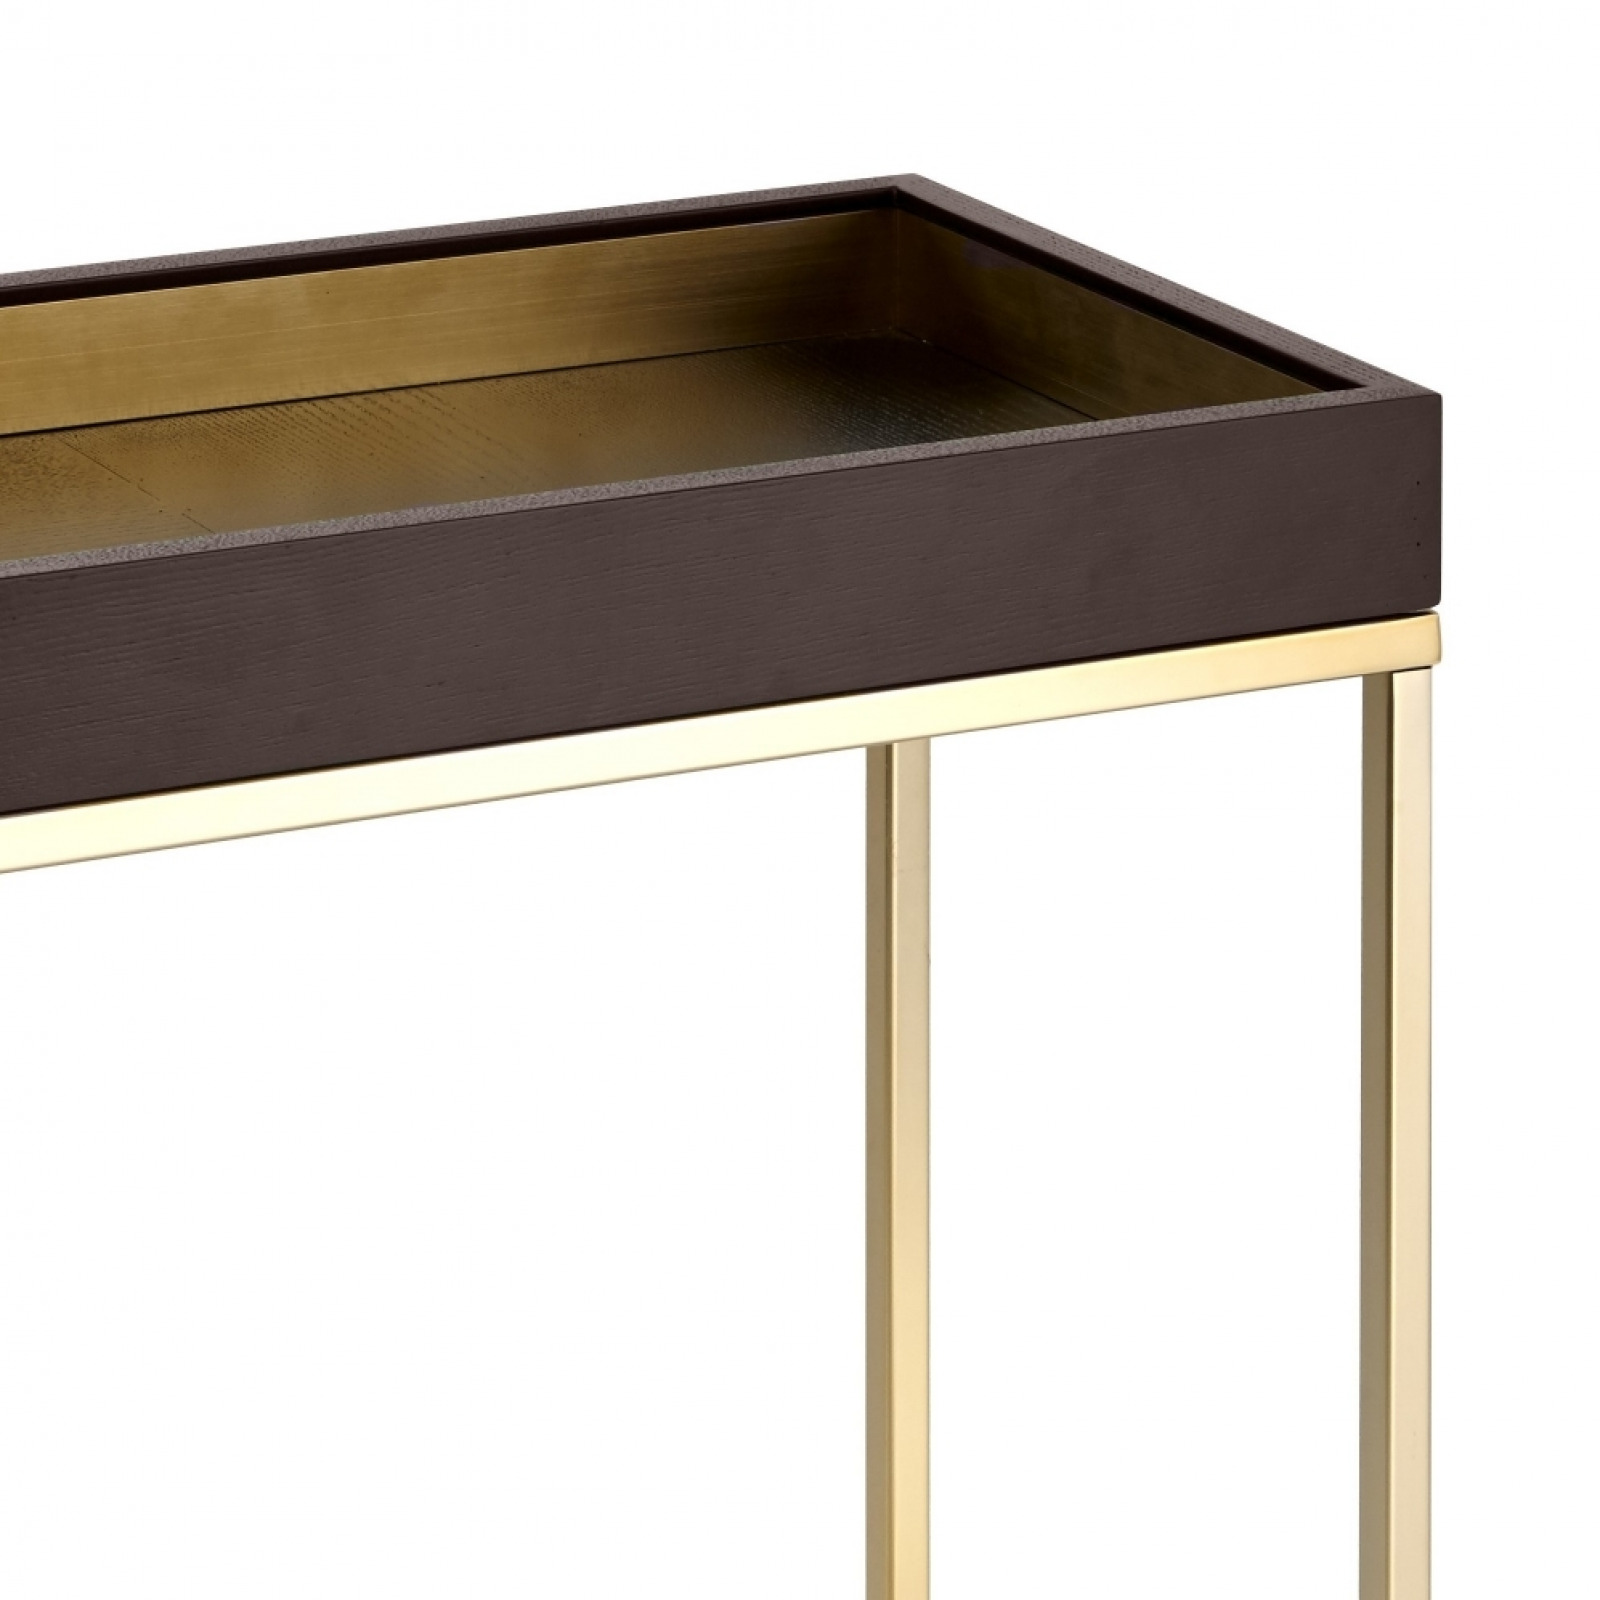 Alyn console table